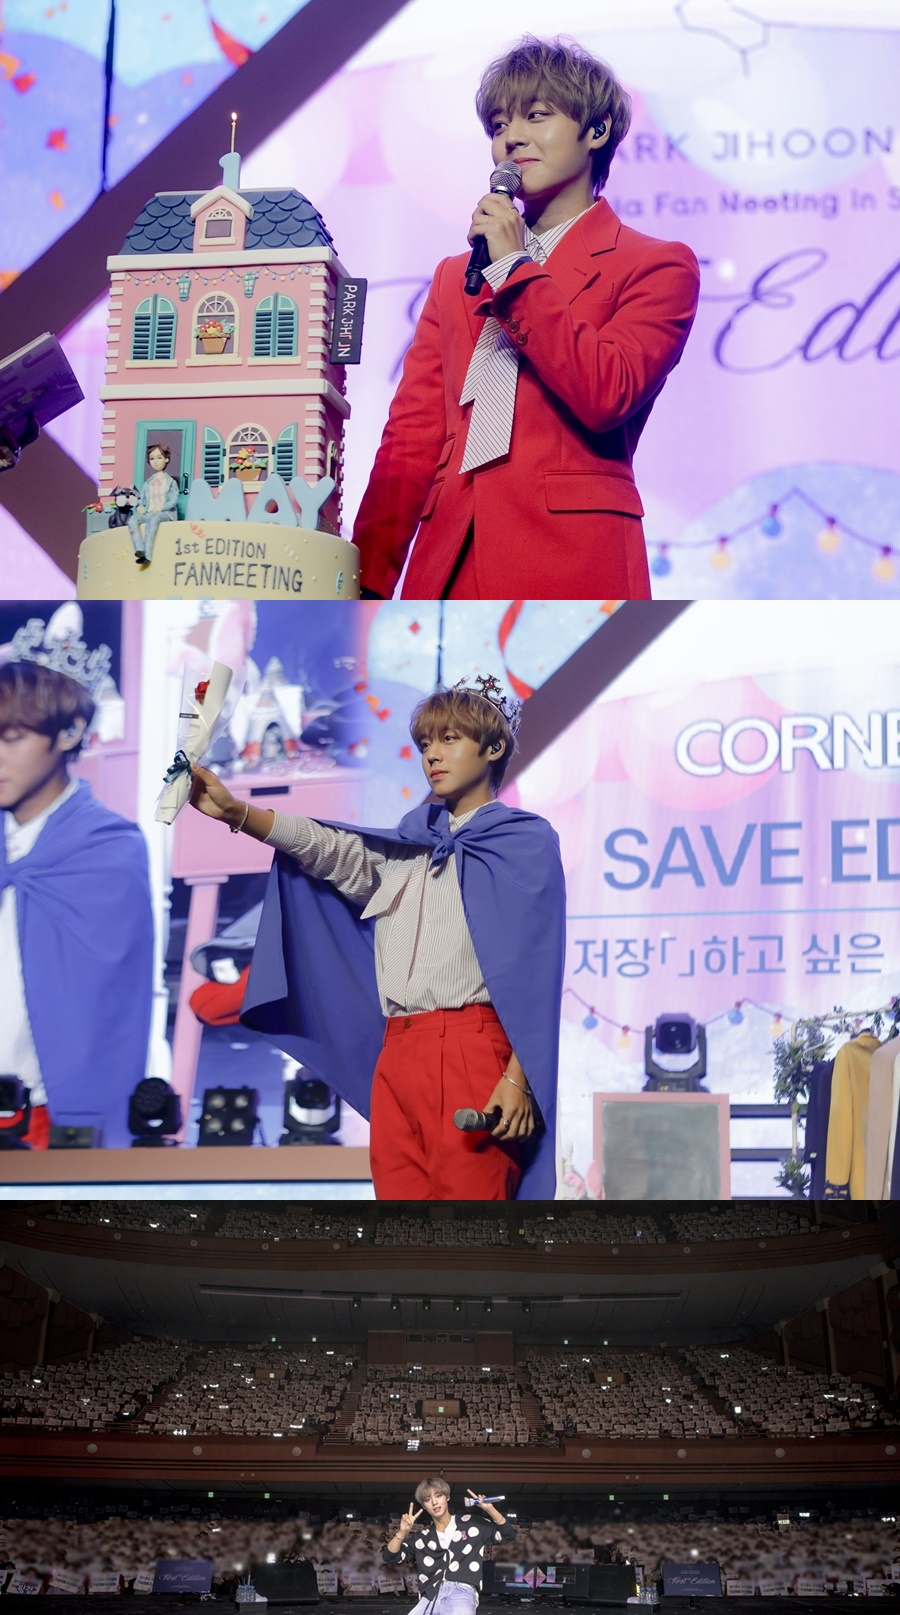 Park Jihoon, a member of the group Wanna One, successfully finished the first solo fan meeting.Park Jihoon held his first solo fan meeting First Edition in Seoul (FIRST EDITION IN SEOUL) at Kyunghee University Peace Hall on the 9th.A total of 7,000 fans gathered at the fan meeting held at 2 pm and 6 pm.Park Jihoon, who took the stage in the all-red suit fashion on the day, opened the door with Ed Sheerans Shape of You dance performance.He has also proved his talent as a solo artist by offering various stages such as Wanna Ones song I Want to Have, unit album 11 (Ten Days), Sulae with fans, and Press Your Number by Taemin.In particular, Park Jihoon first unveiled the stage of his own fan song Young 20, which he wrote in his mind. It is a song presented by Lee Dae-hwis composer.I also participated in rap making while thinking about the fans, and if you like it, you will be able to meet it with a single sound source. In addition, members of the fan meeting, Yoon Ji-sung, Kim Jae-hwan, and Bae Jin Young, who participated in Wanna One activities, were surprised to appear with a bouquet of flowers.Those who showed off their extraordinary loyalty in search of the scene even in a busy schedule showed a warm friendship by supporting the future of Park Jihoon.Park Jihoon, who led the fan meeting for about 2 hours and 30 minutes, said, I will practice all genres.I want to be with you for a long time until the dinner show. He gave his aspirations and ended his first solo fan meeting.Park Jihoons Asian fan meeting will be held in Japan and Hong Kong starting with Seoul.